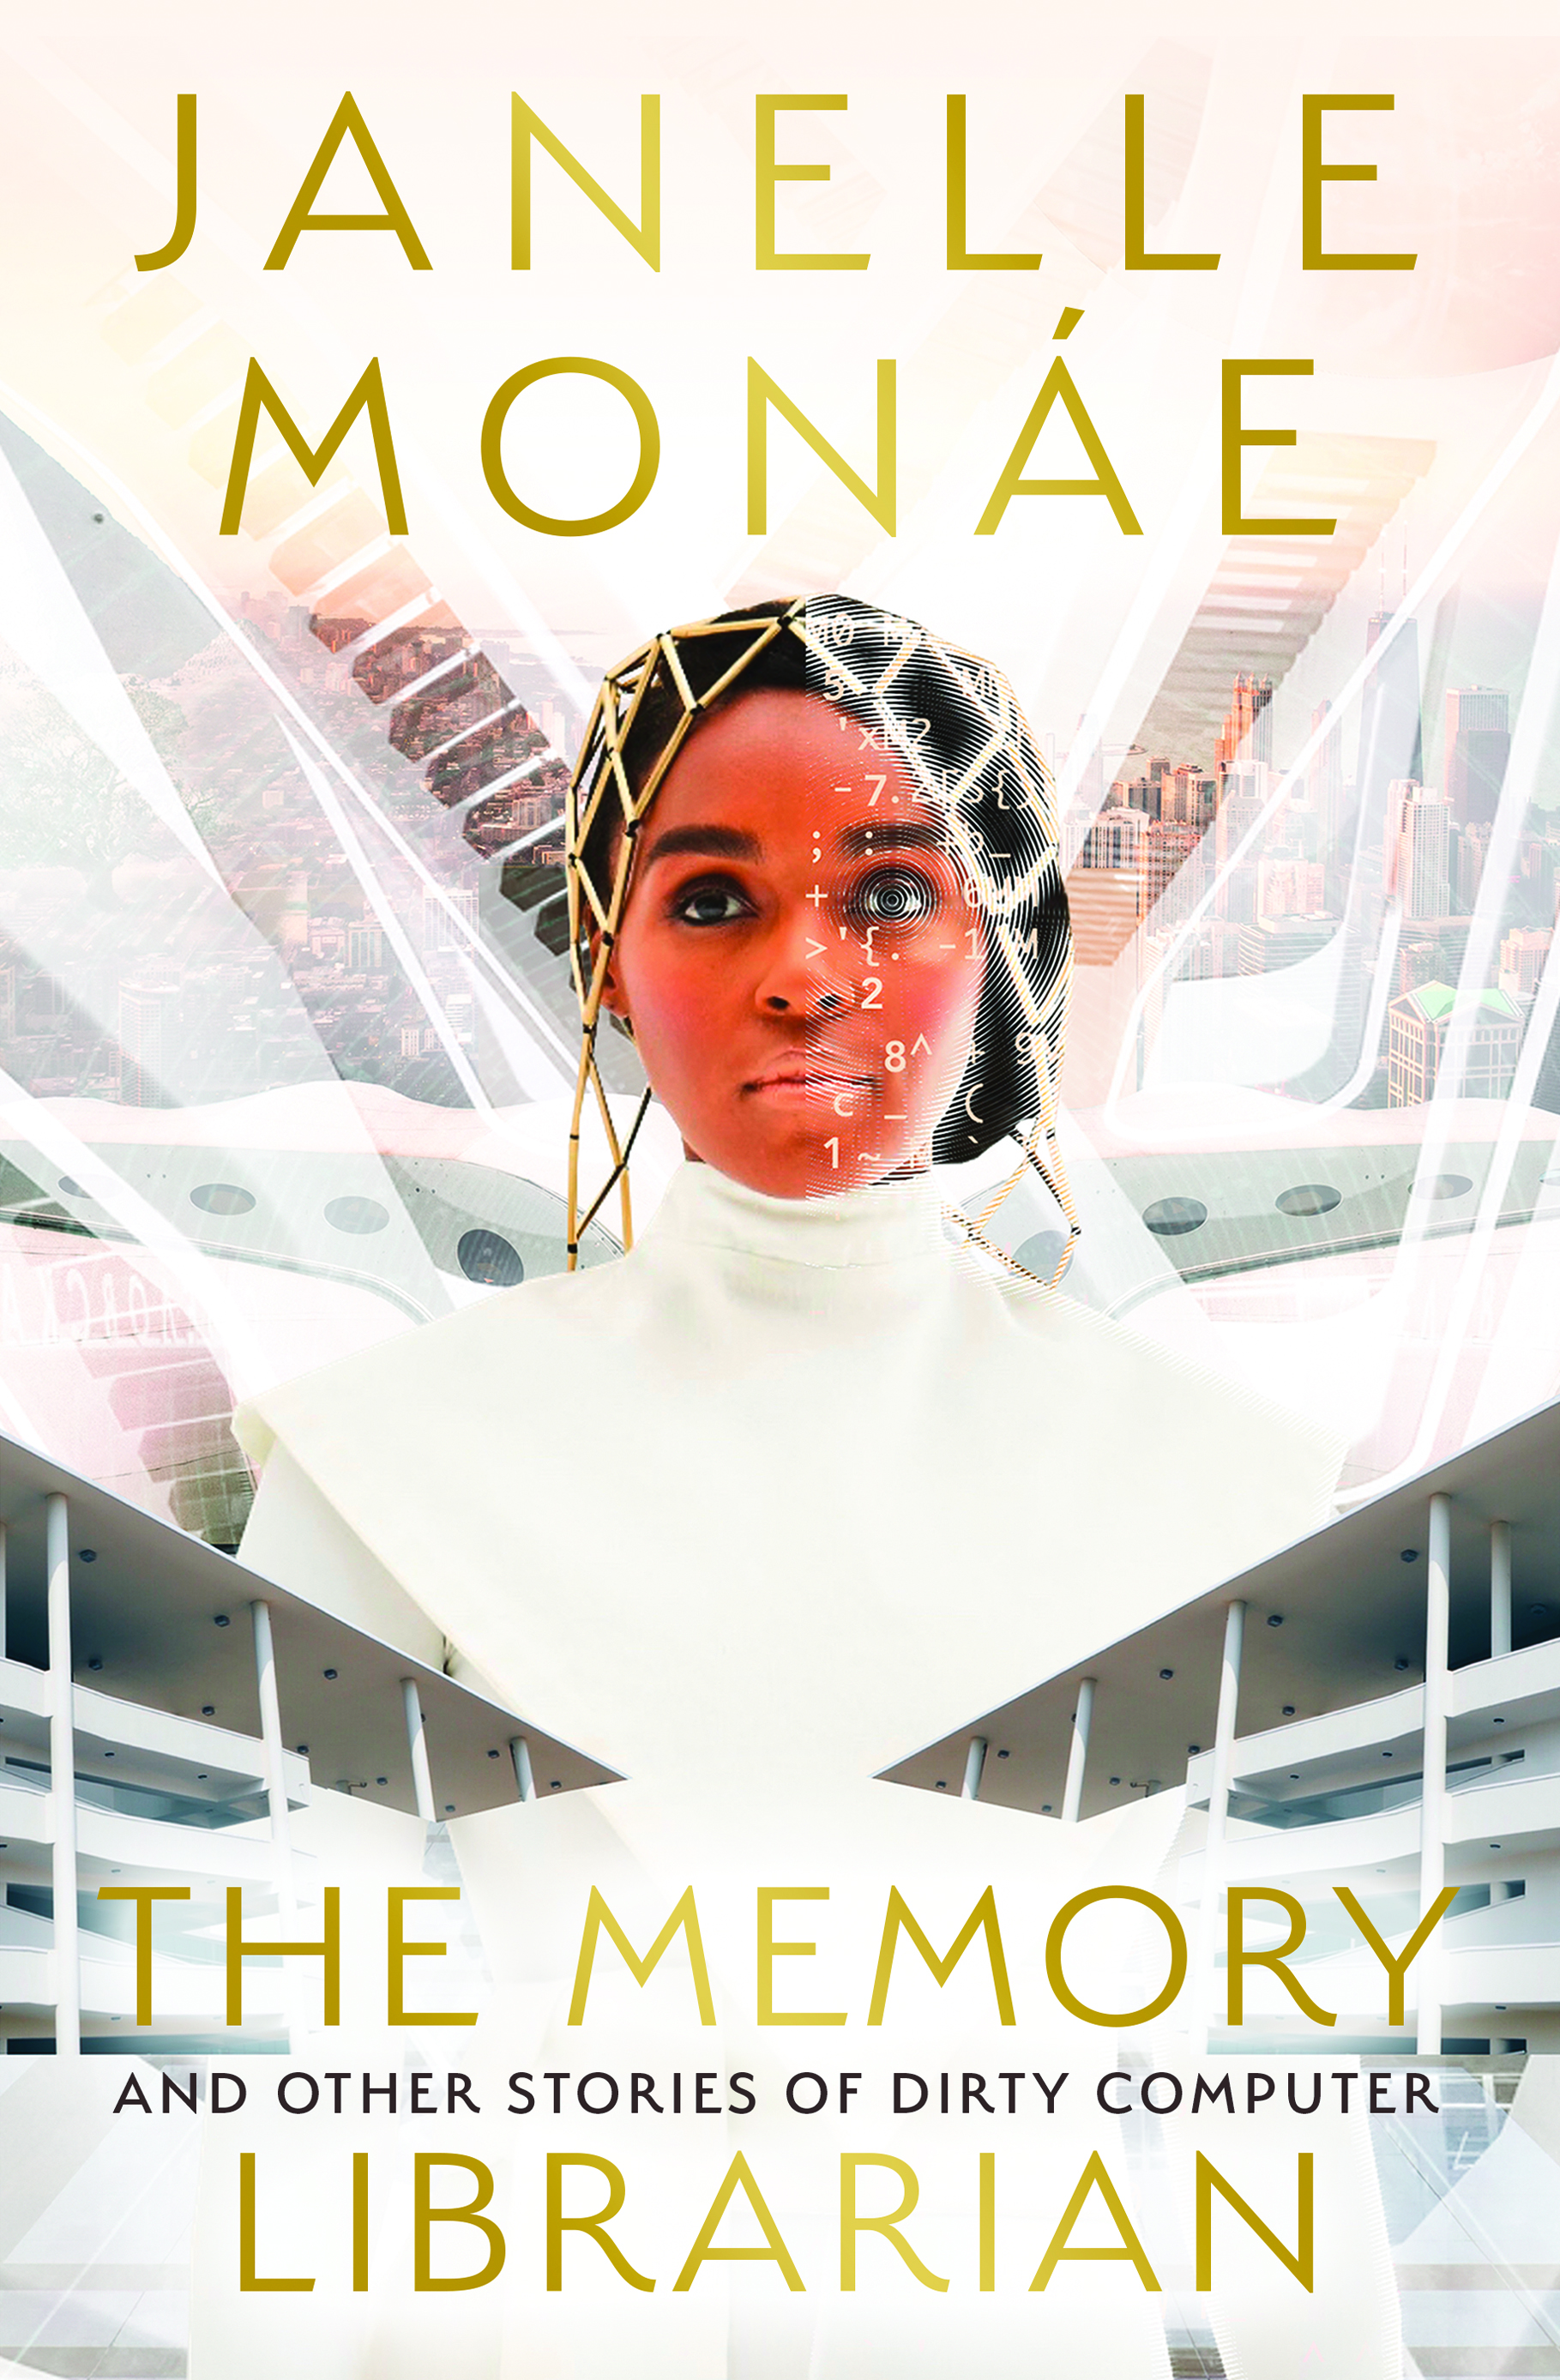 Detail from the cover of Janelle Monáe’s book The Memory Librarian, picturing Monáe in white, wearing a golden headdress consisting of interconnected triangles, with an overlay of keyboard symbols and numbers superimposed above her face